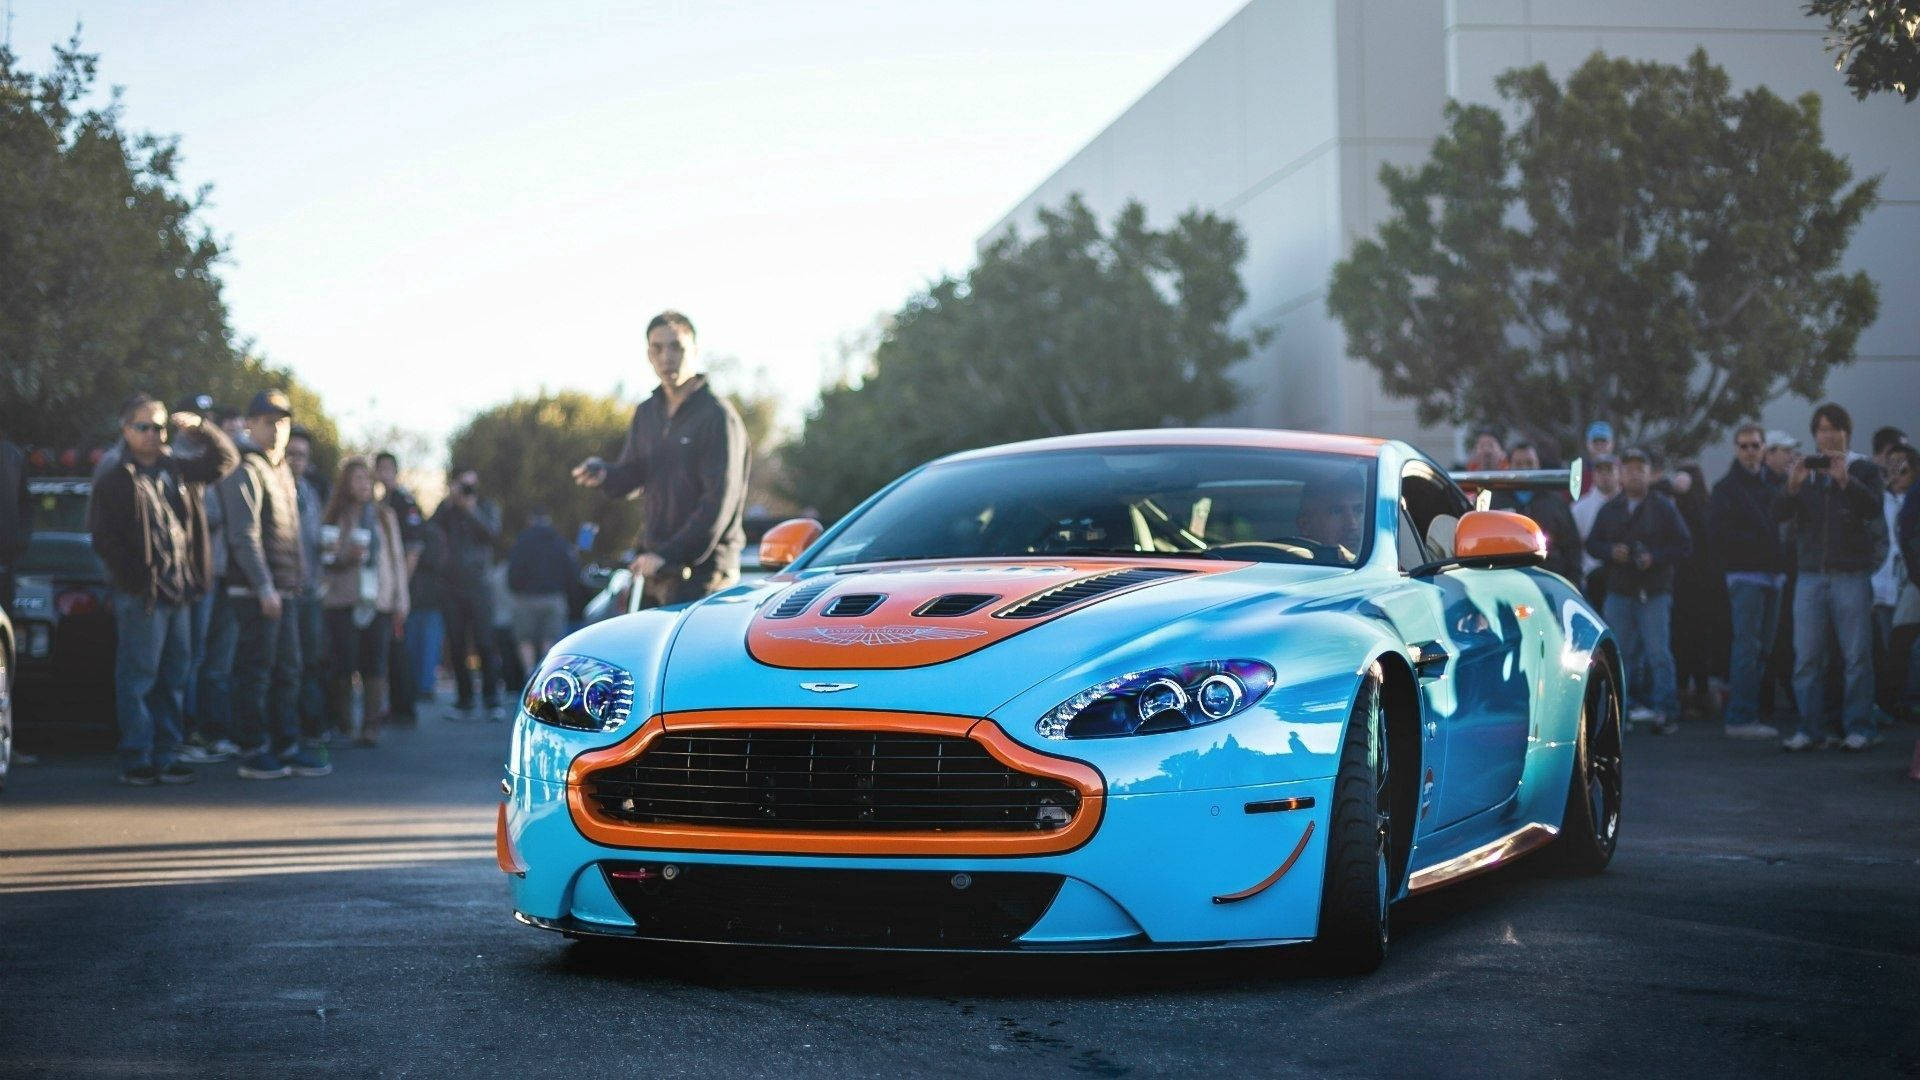 Aston Martin 1920X1080 Wallpaper and Background Image